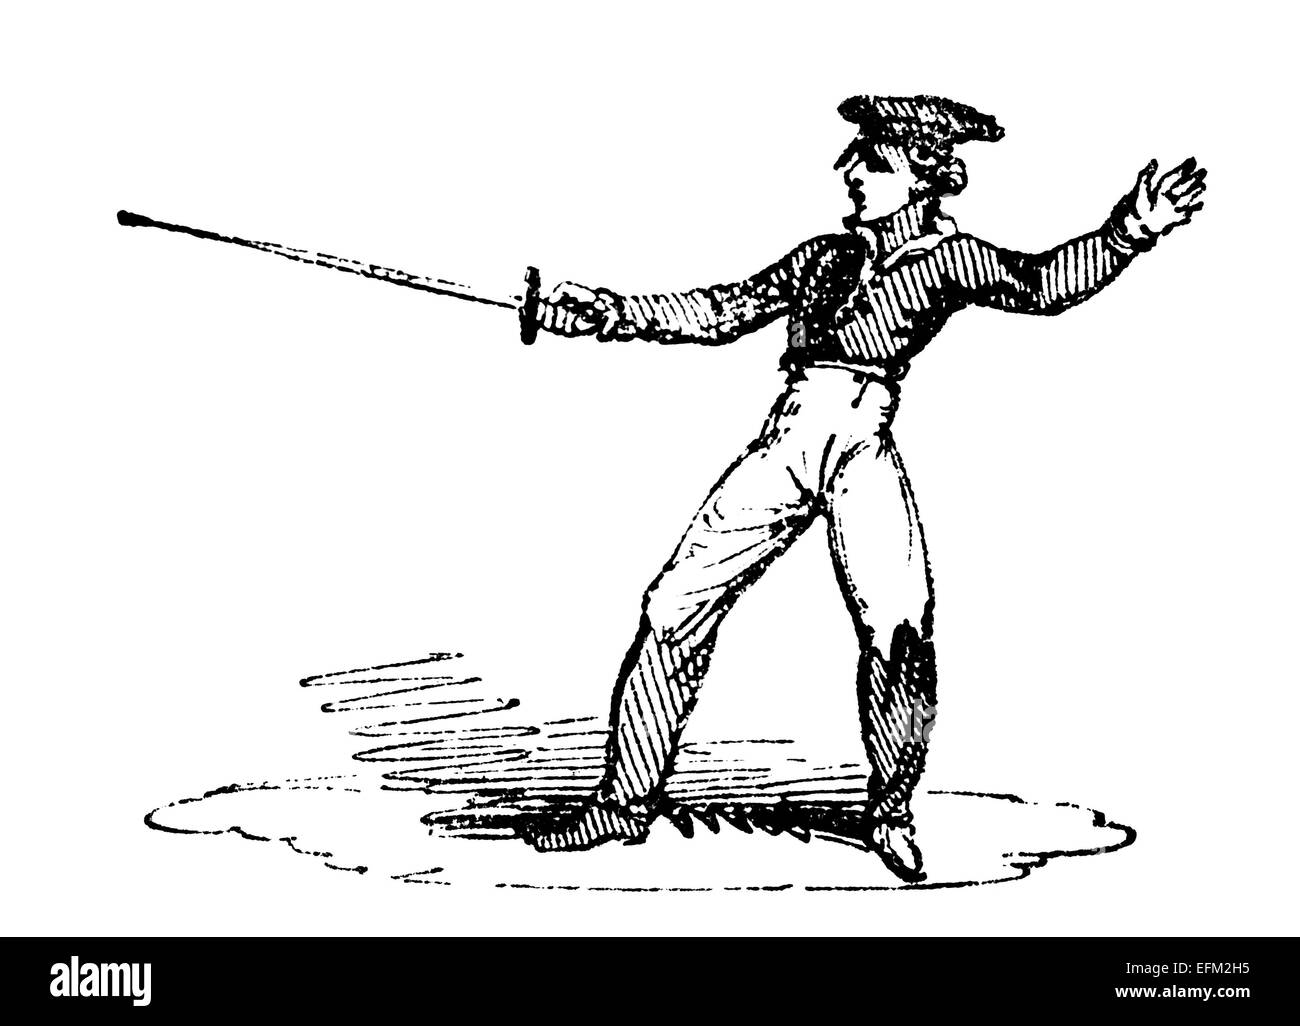 19th century engraving of a boy fencing with a sword Stock Photo